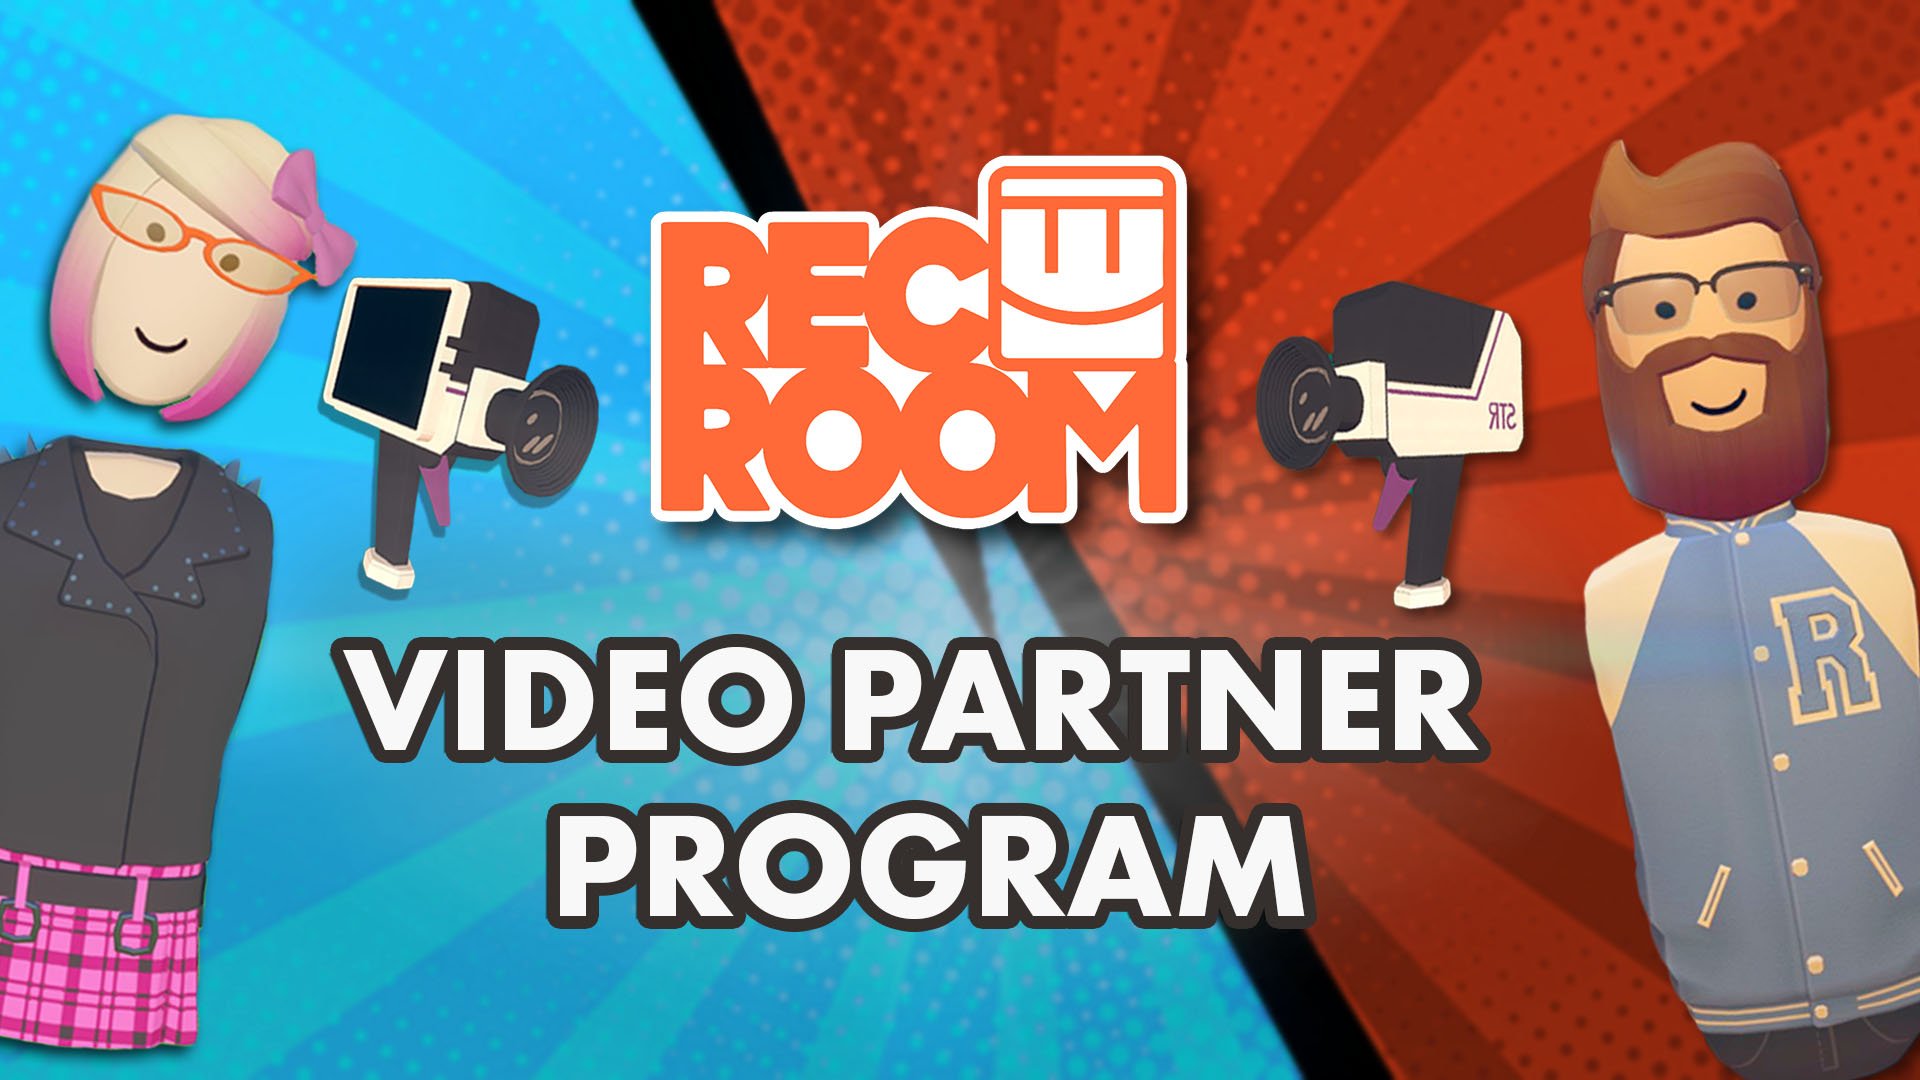 Rec Room Gift Cards Gives Players Exclusive items! 